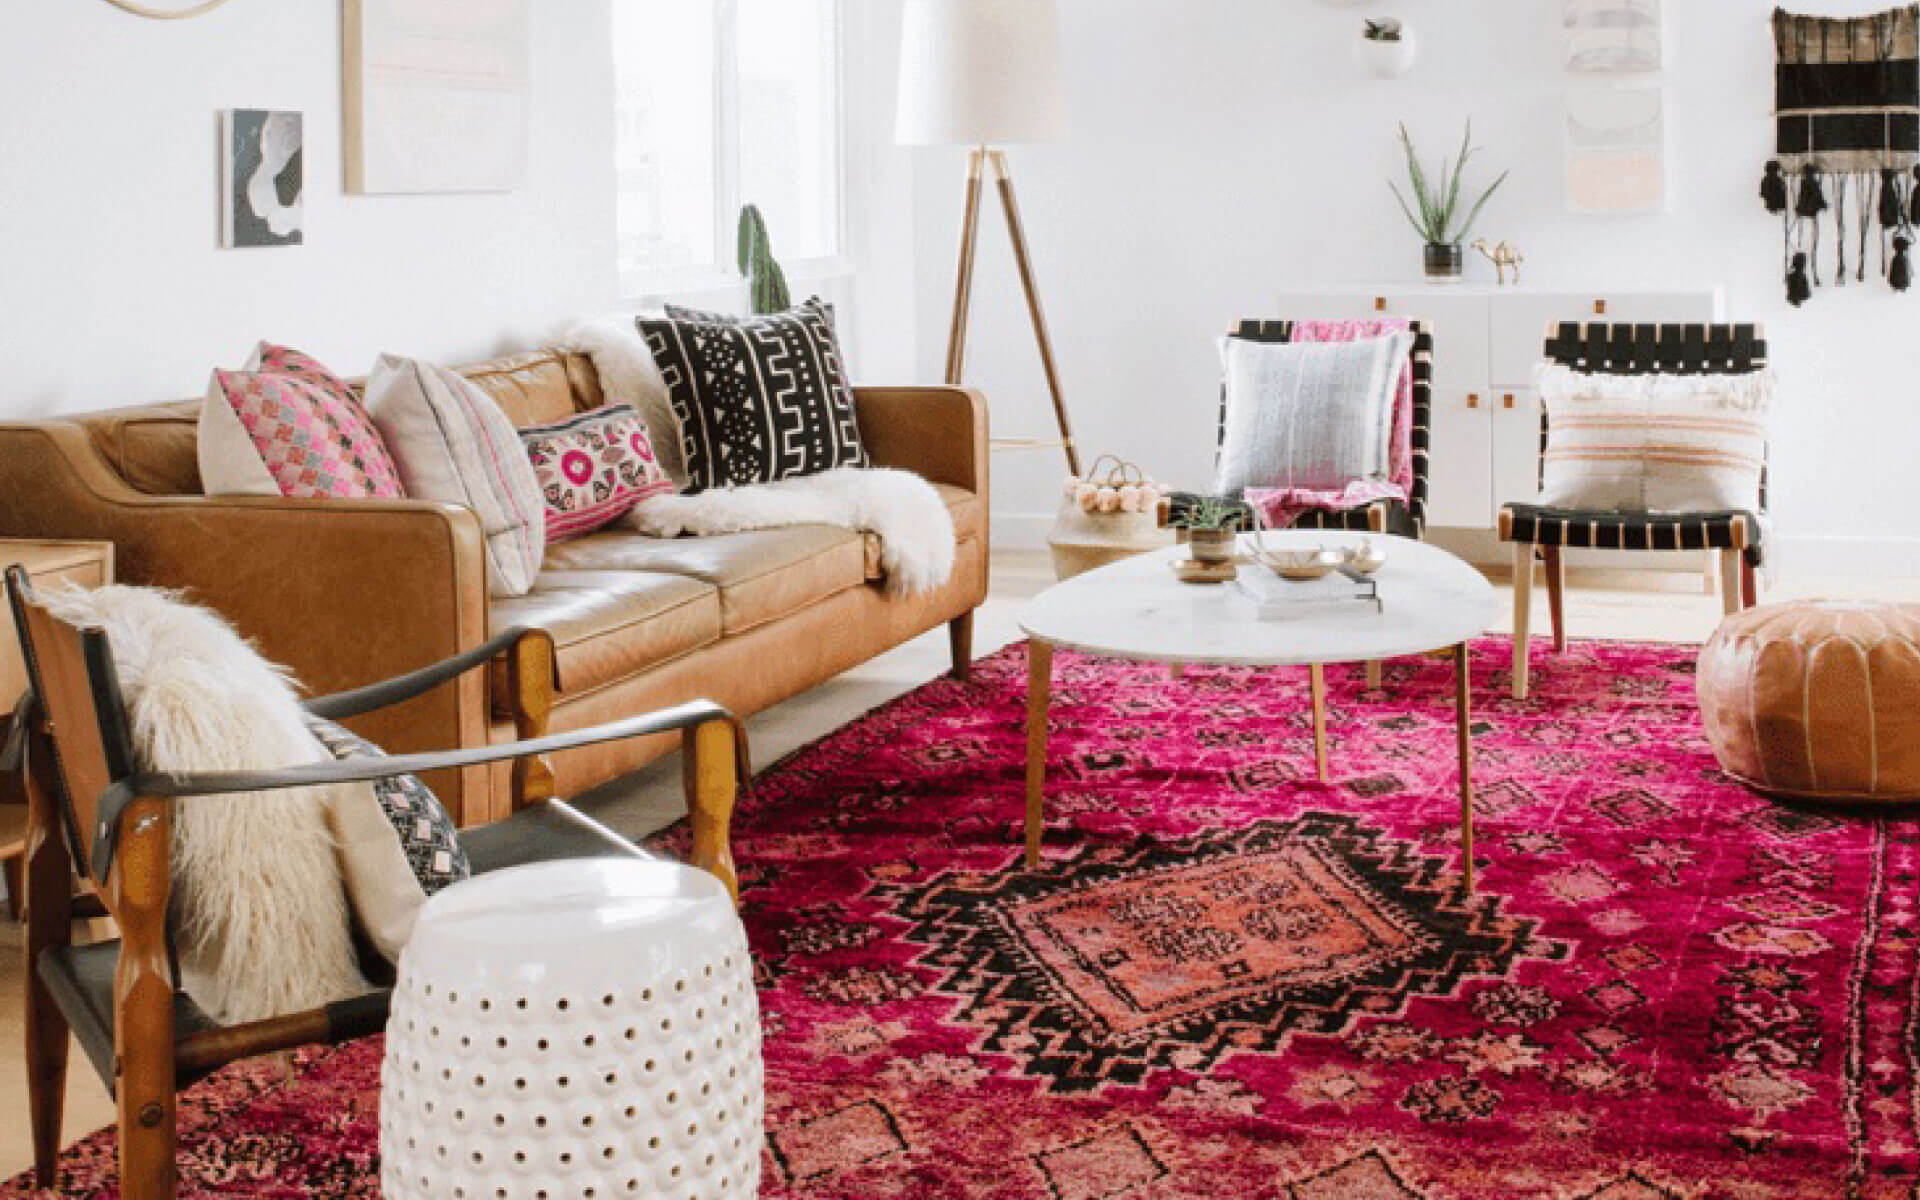 Why do people buy Moroccan rugs online?